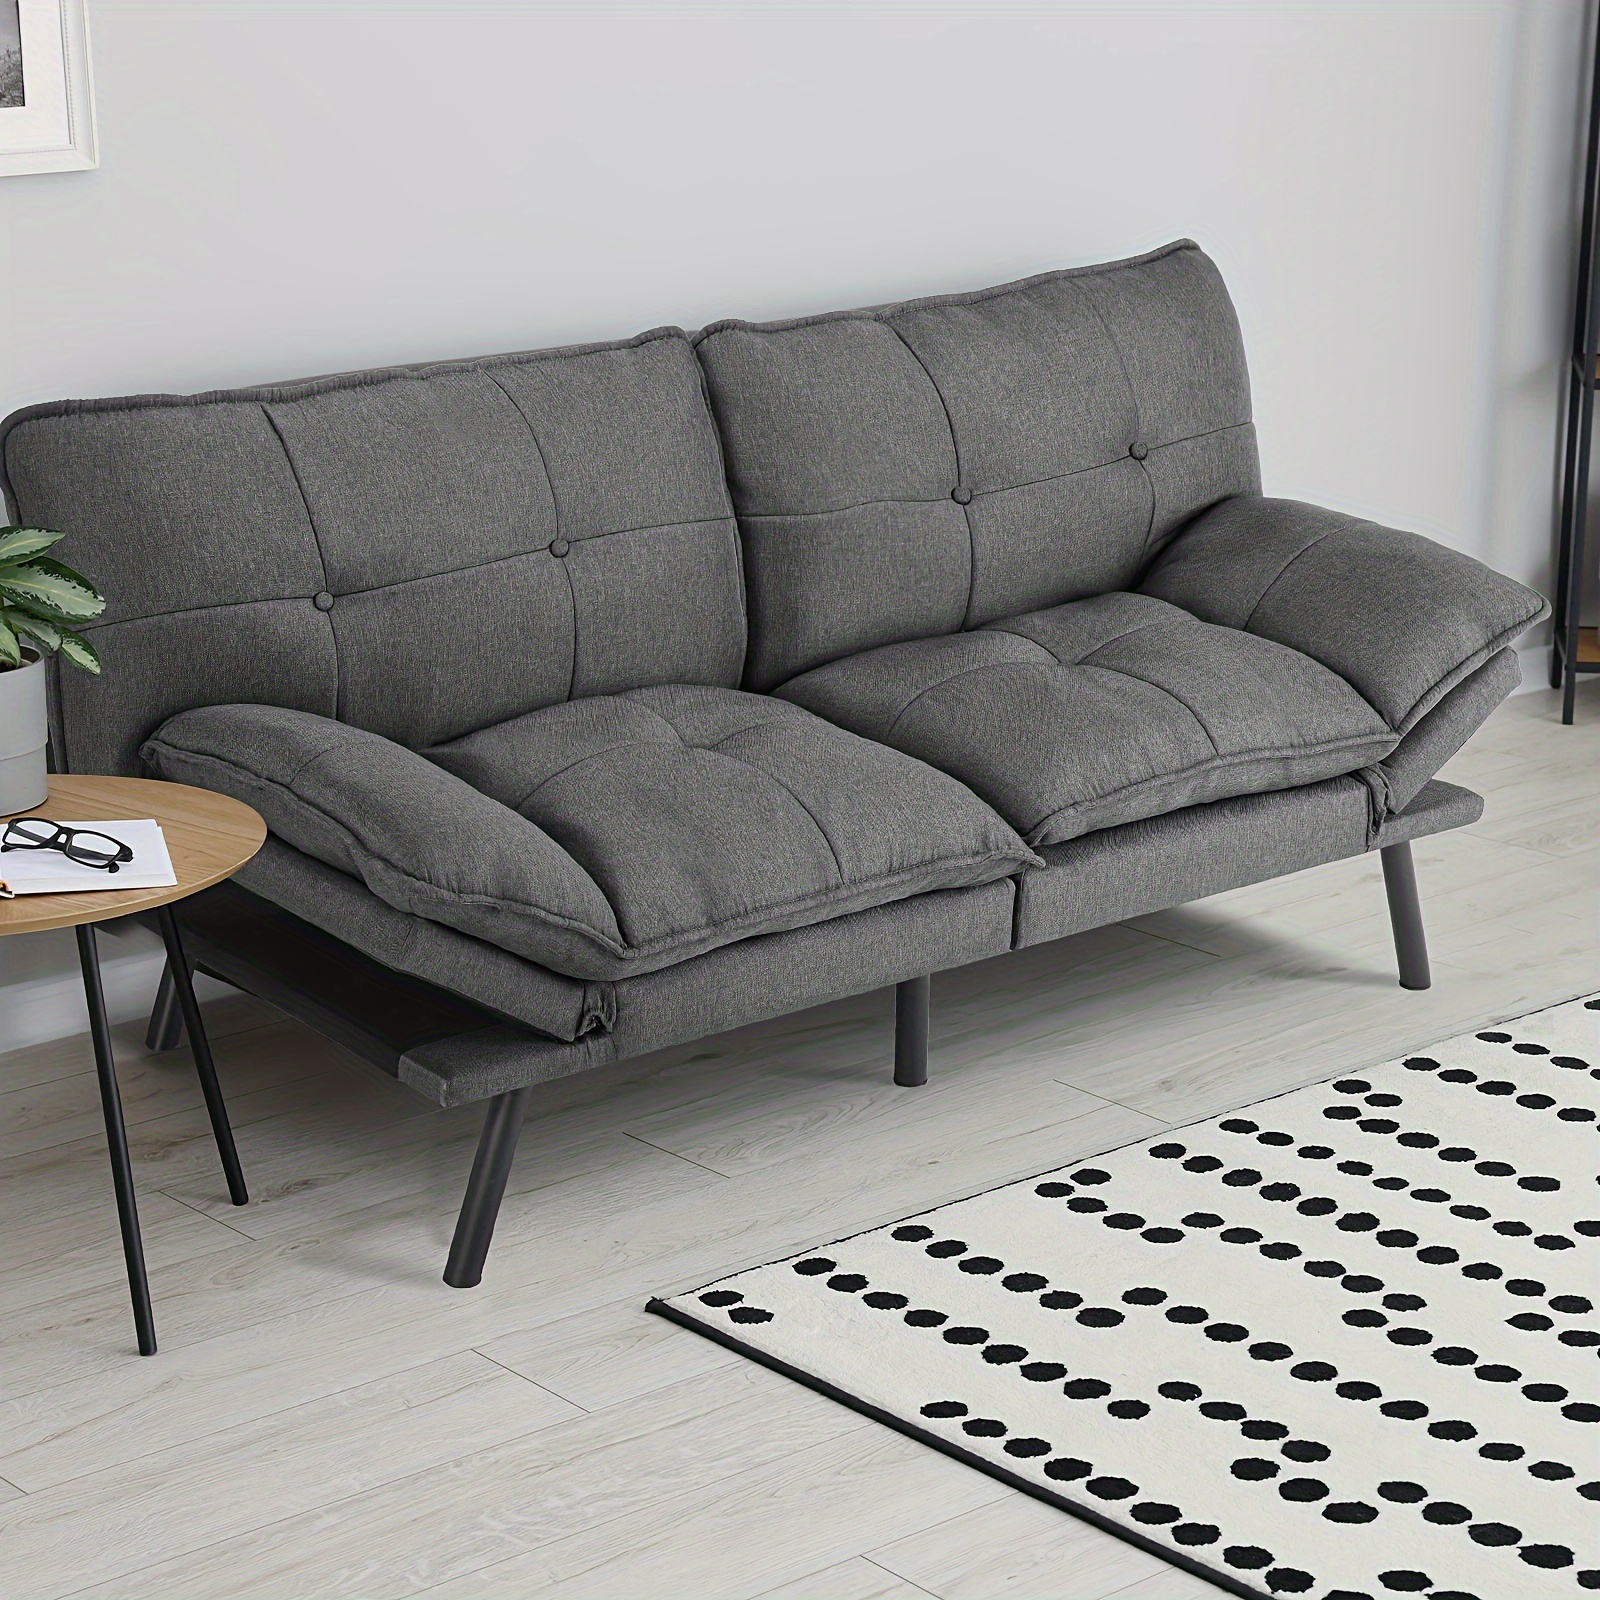 

Sofa Sleeper, Modern Convertible Lazy Futon, Futon Sofa Bed For Living Room, Small Space, Apartment Office